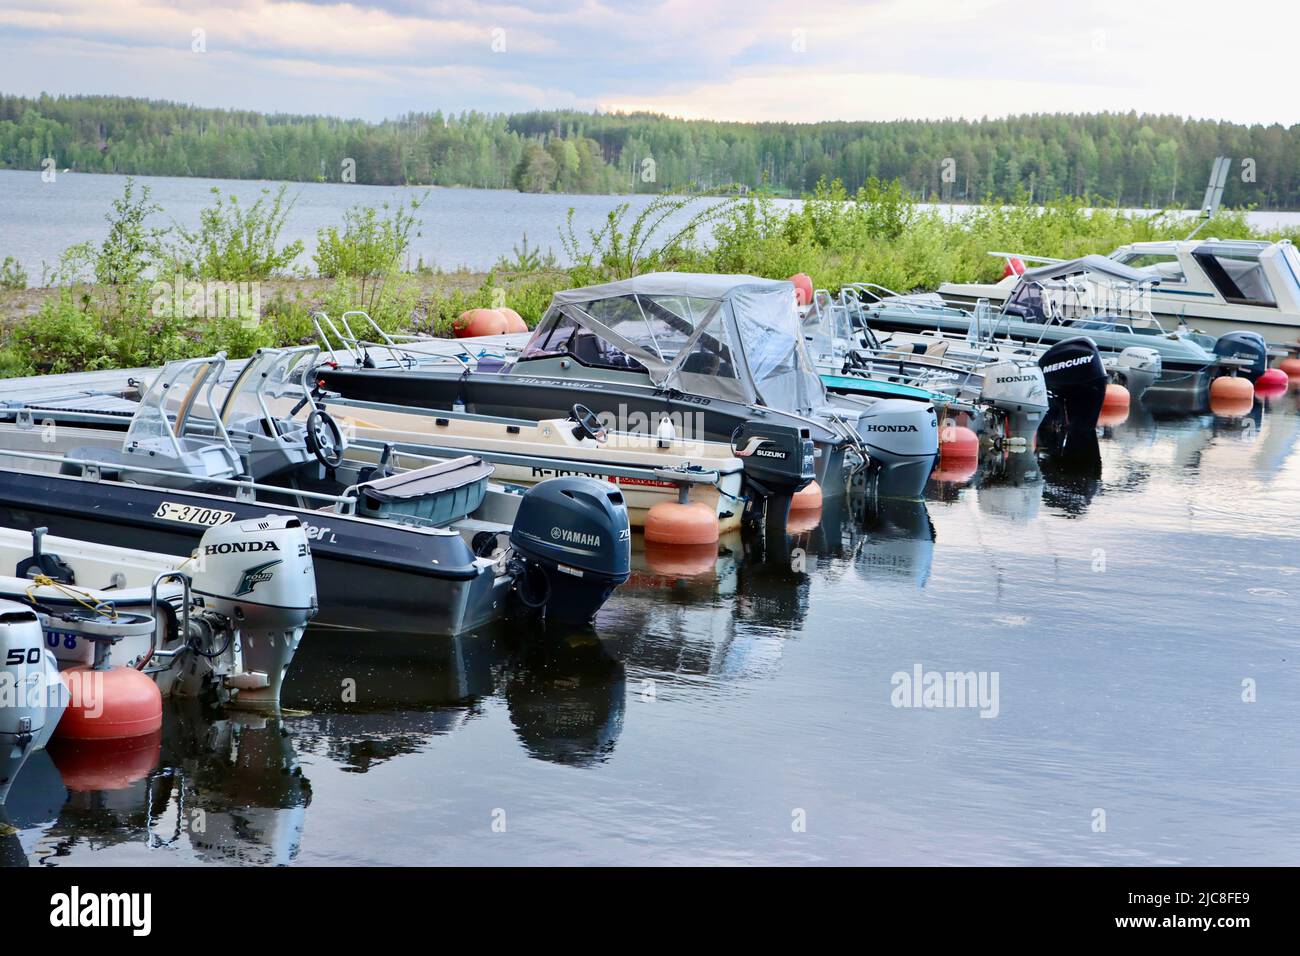 Boats of people with summer houses near the border zone on Lake Pyhäjärvi on the Finland side of the Finland-Russia borden Stock Photo